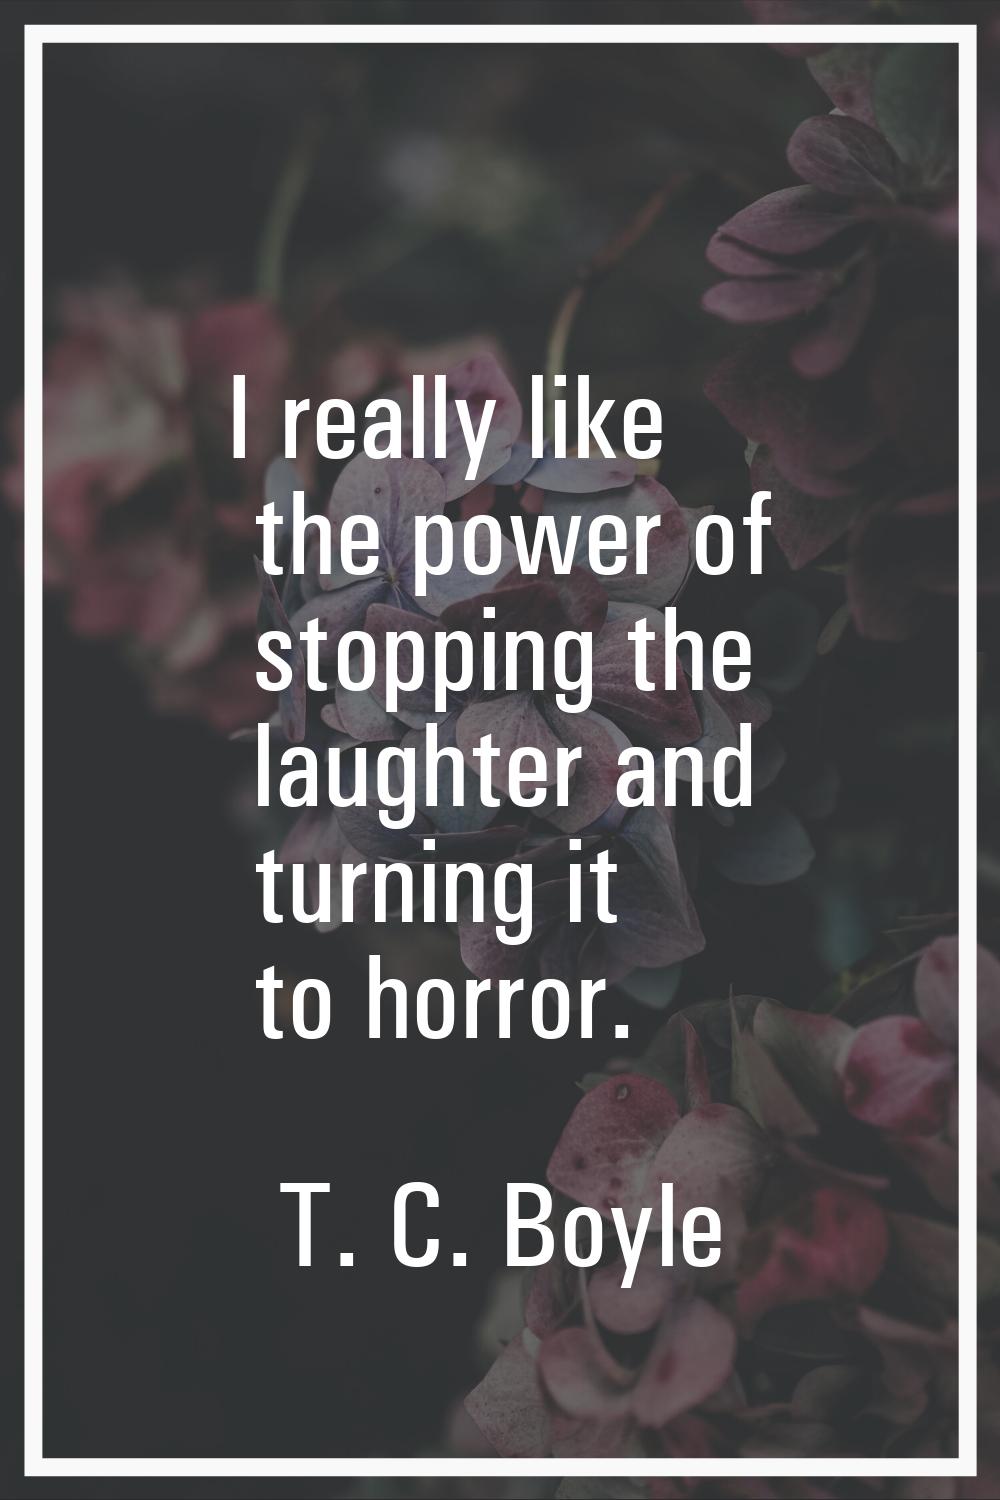 I really like the power of stopping the laughter and turning it to horror.